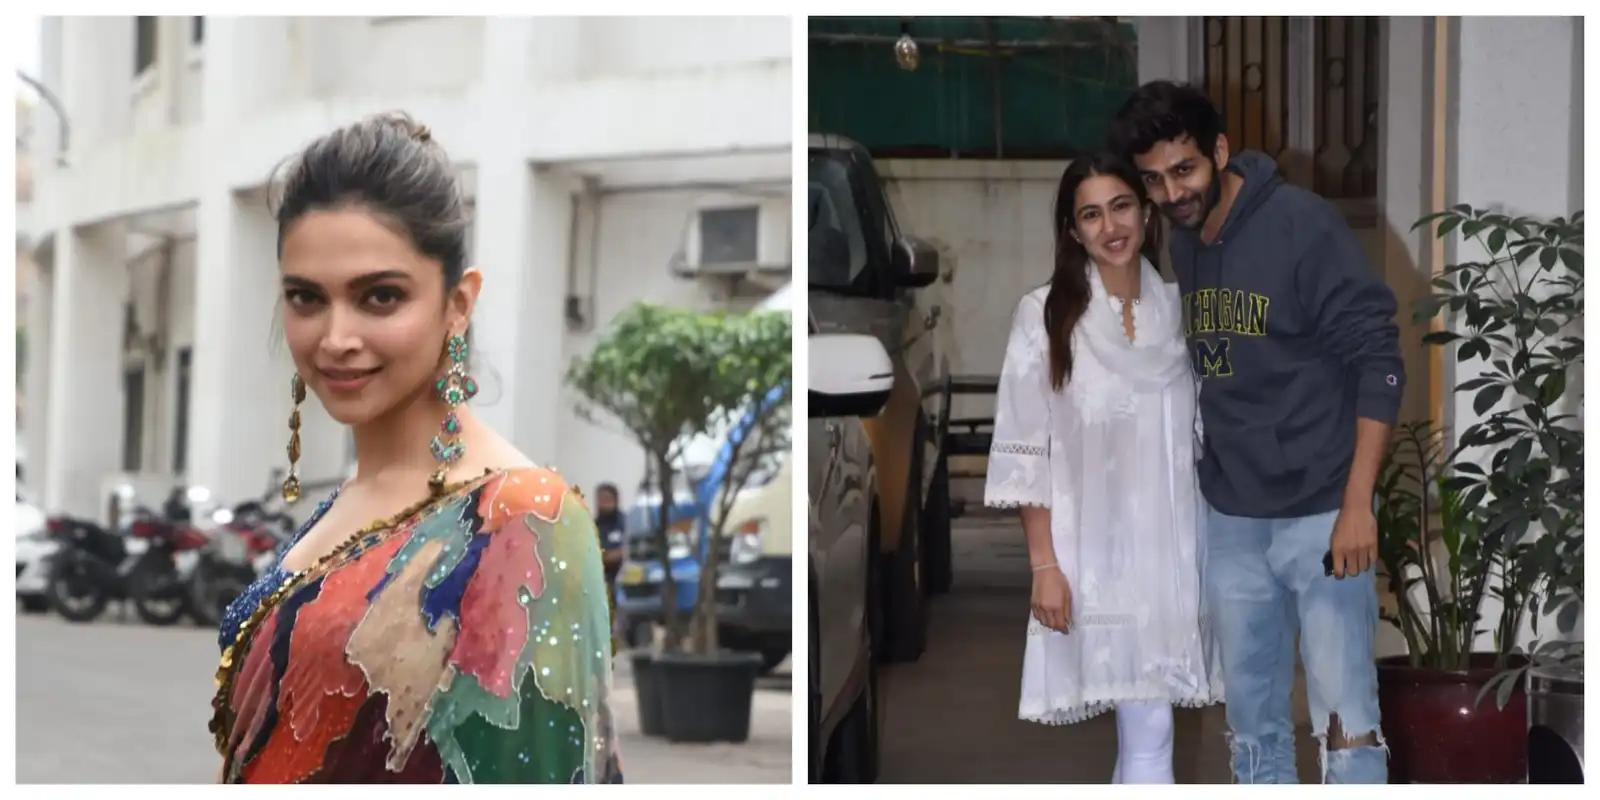 Spotted; Sara Ali Khan And Kartik Aaryan Pose Together For The Cameras, Deepika Padukone Continues To Promote Chhapaak